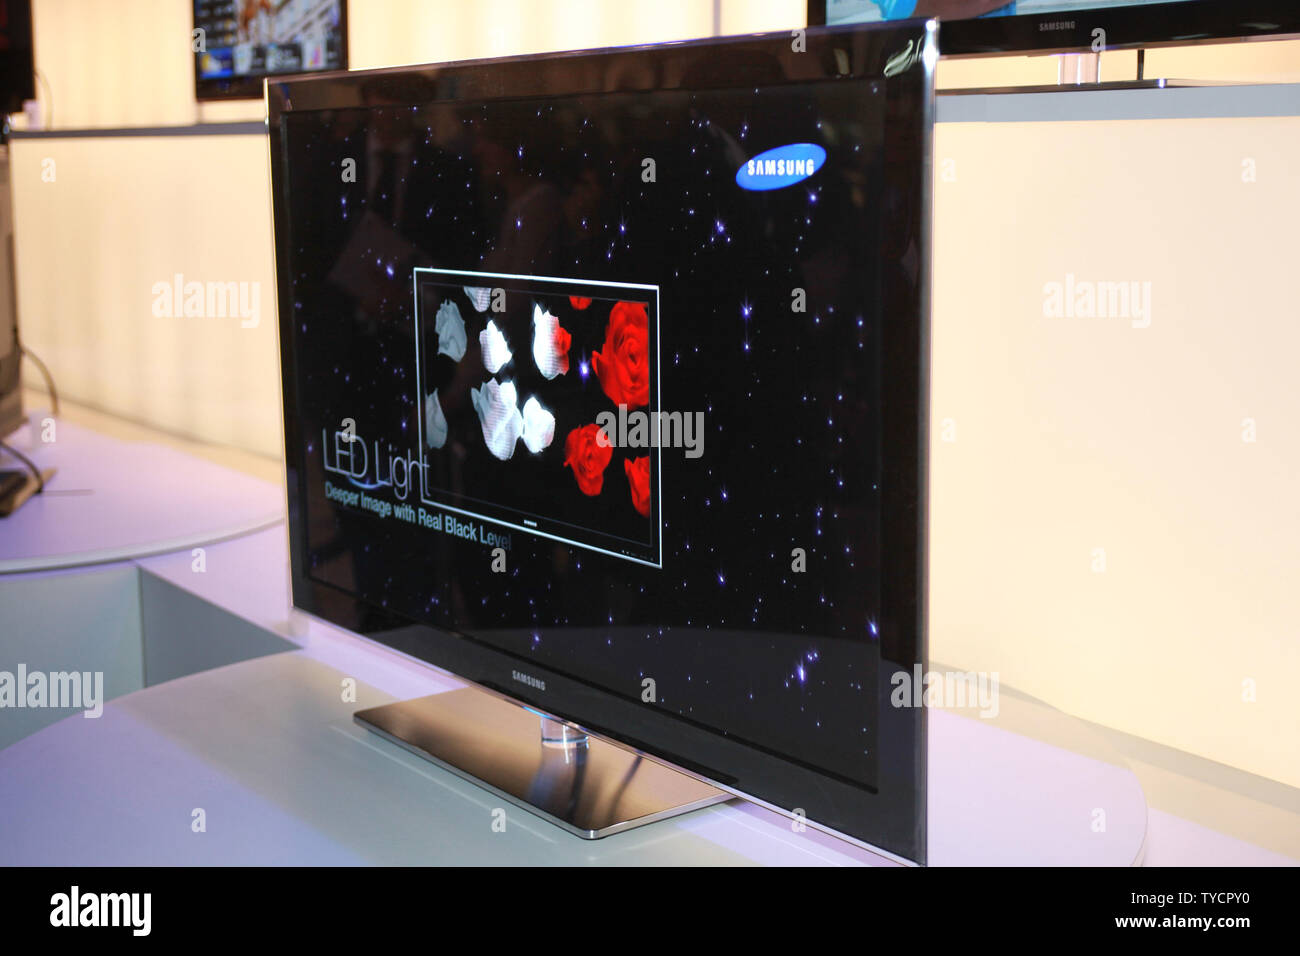 Samsung Corporation displays their newest LED TV 8000 monitor during the  International Consumer Electronics Show (CES) in Las Vegas on January 8,  2009. Samsung's light emitting diode, LED TV 8000 model offers